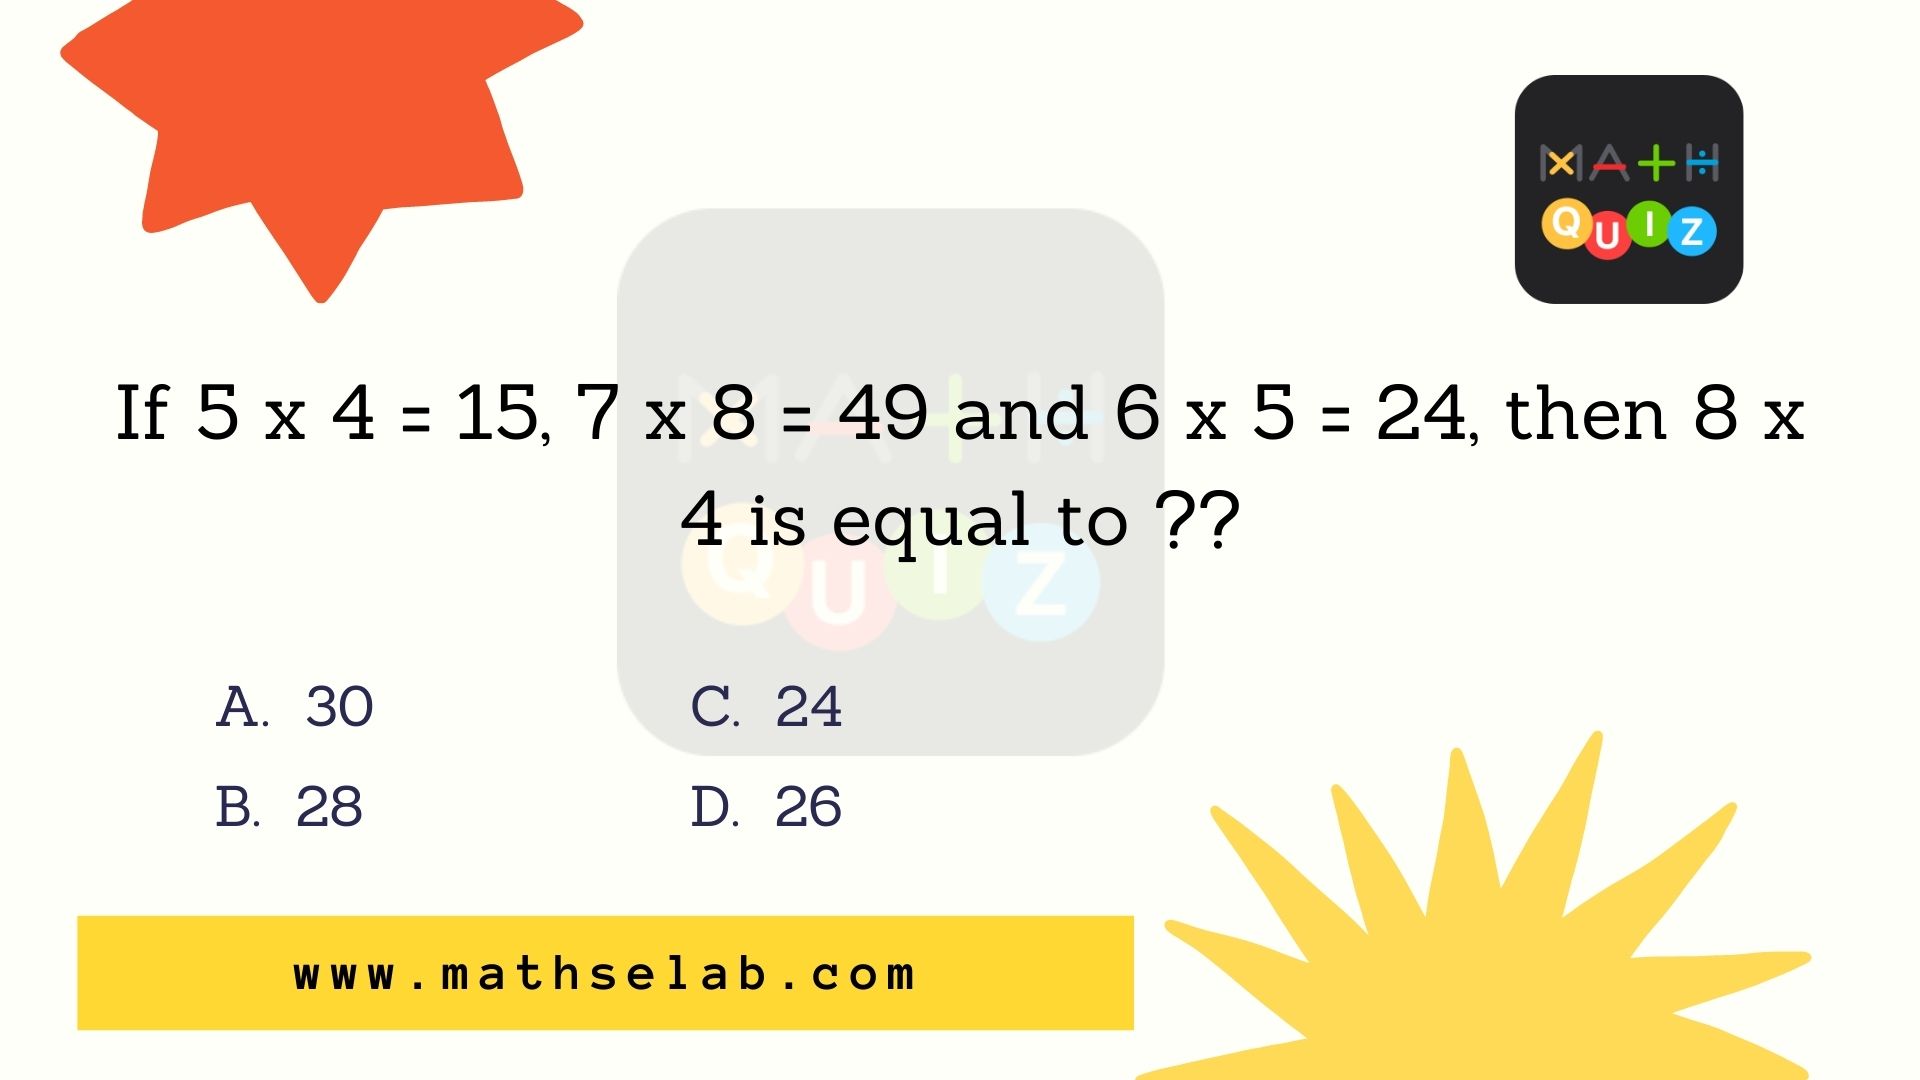 If 5 x 4 = 15, 7 x 8 = 49 and 6 x 5 = 24, then 8 x 4 is equal to - mathselab.com